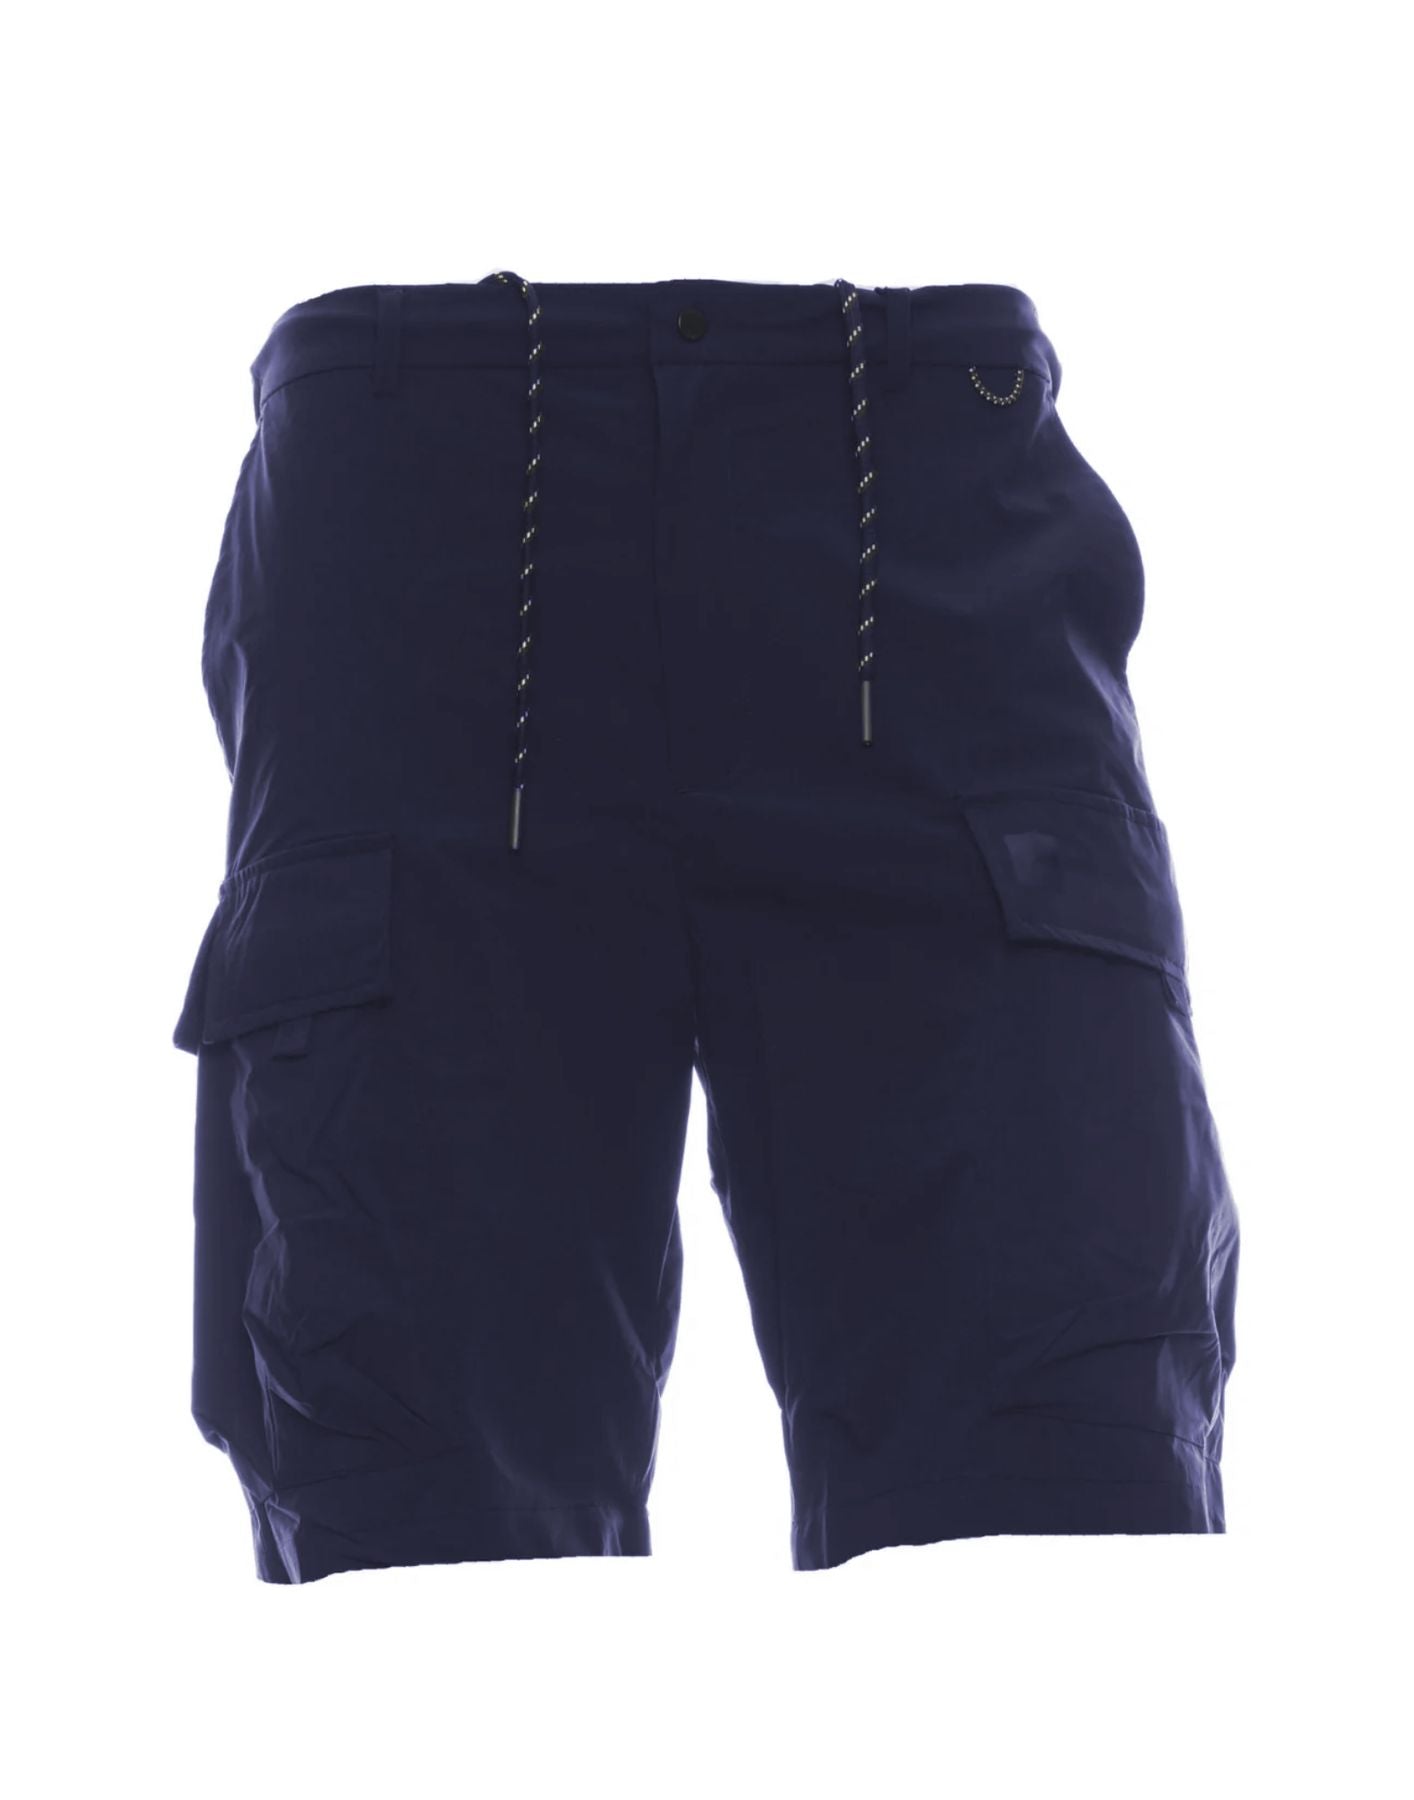 Shorts for man EOTM216AG42 NAVY OUTHERE